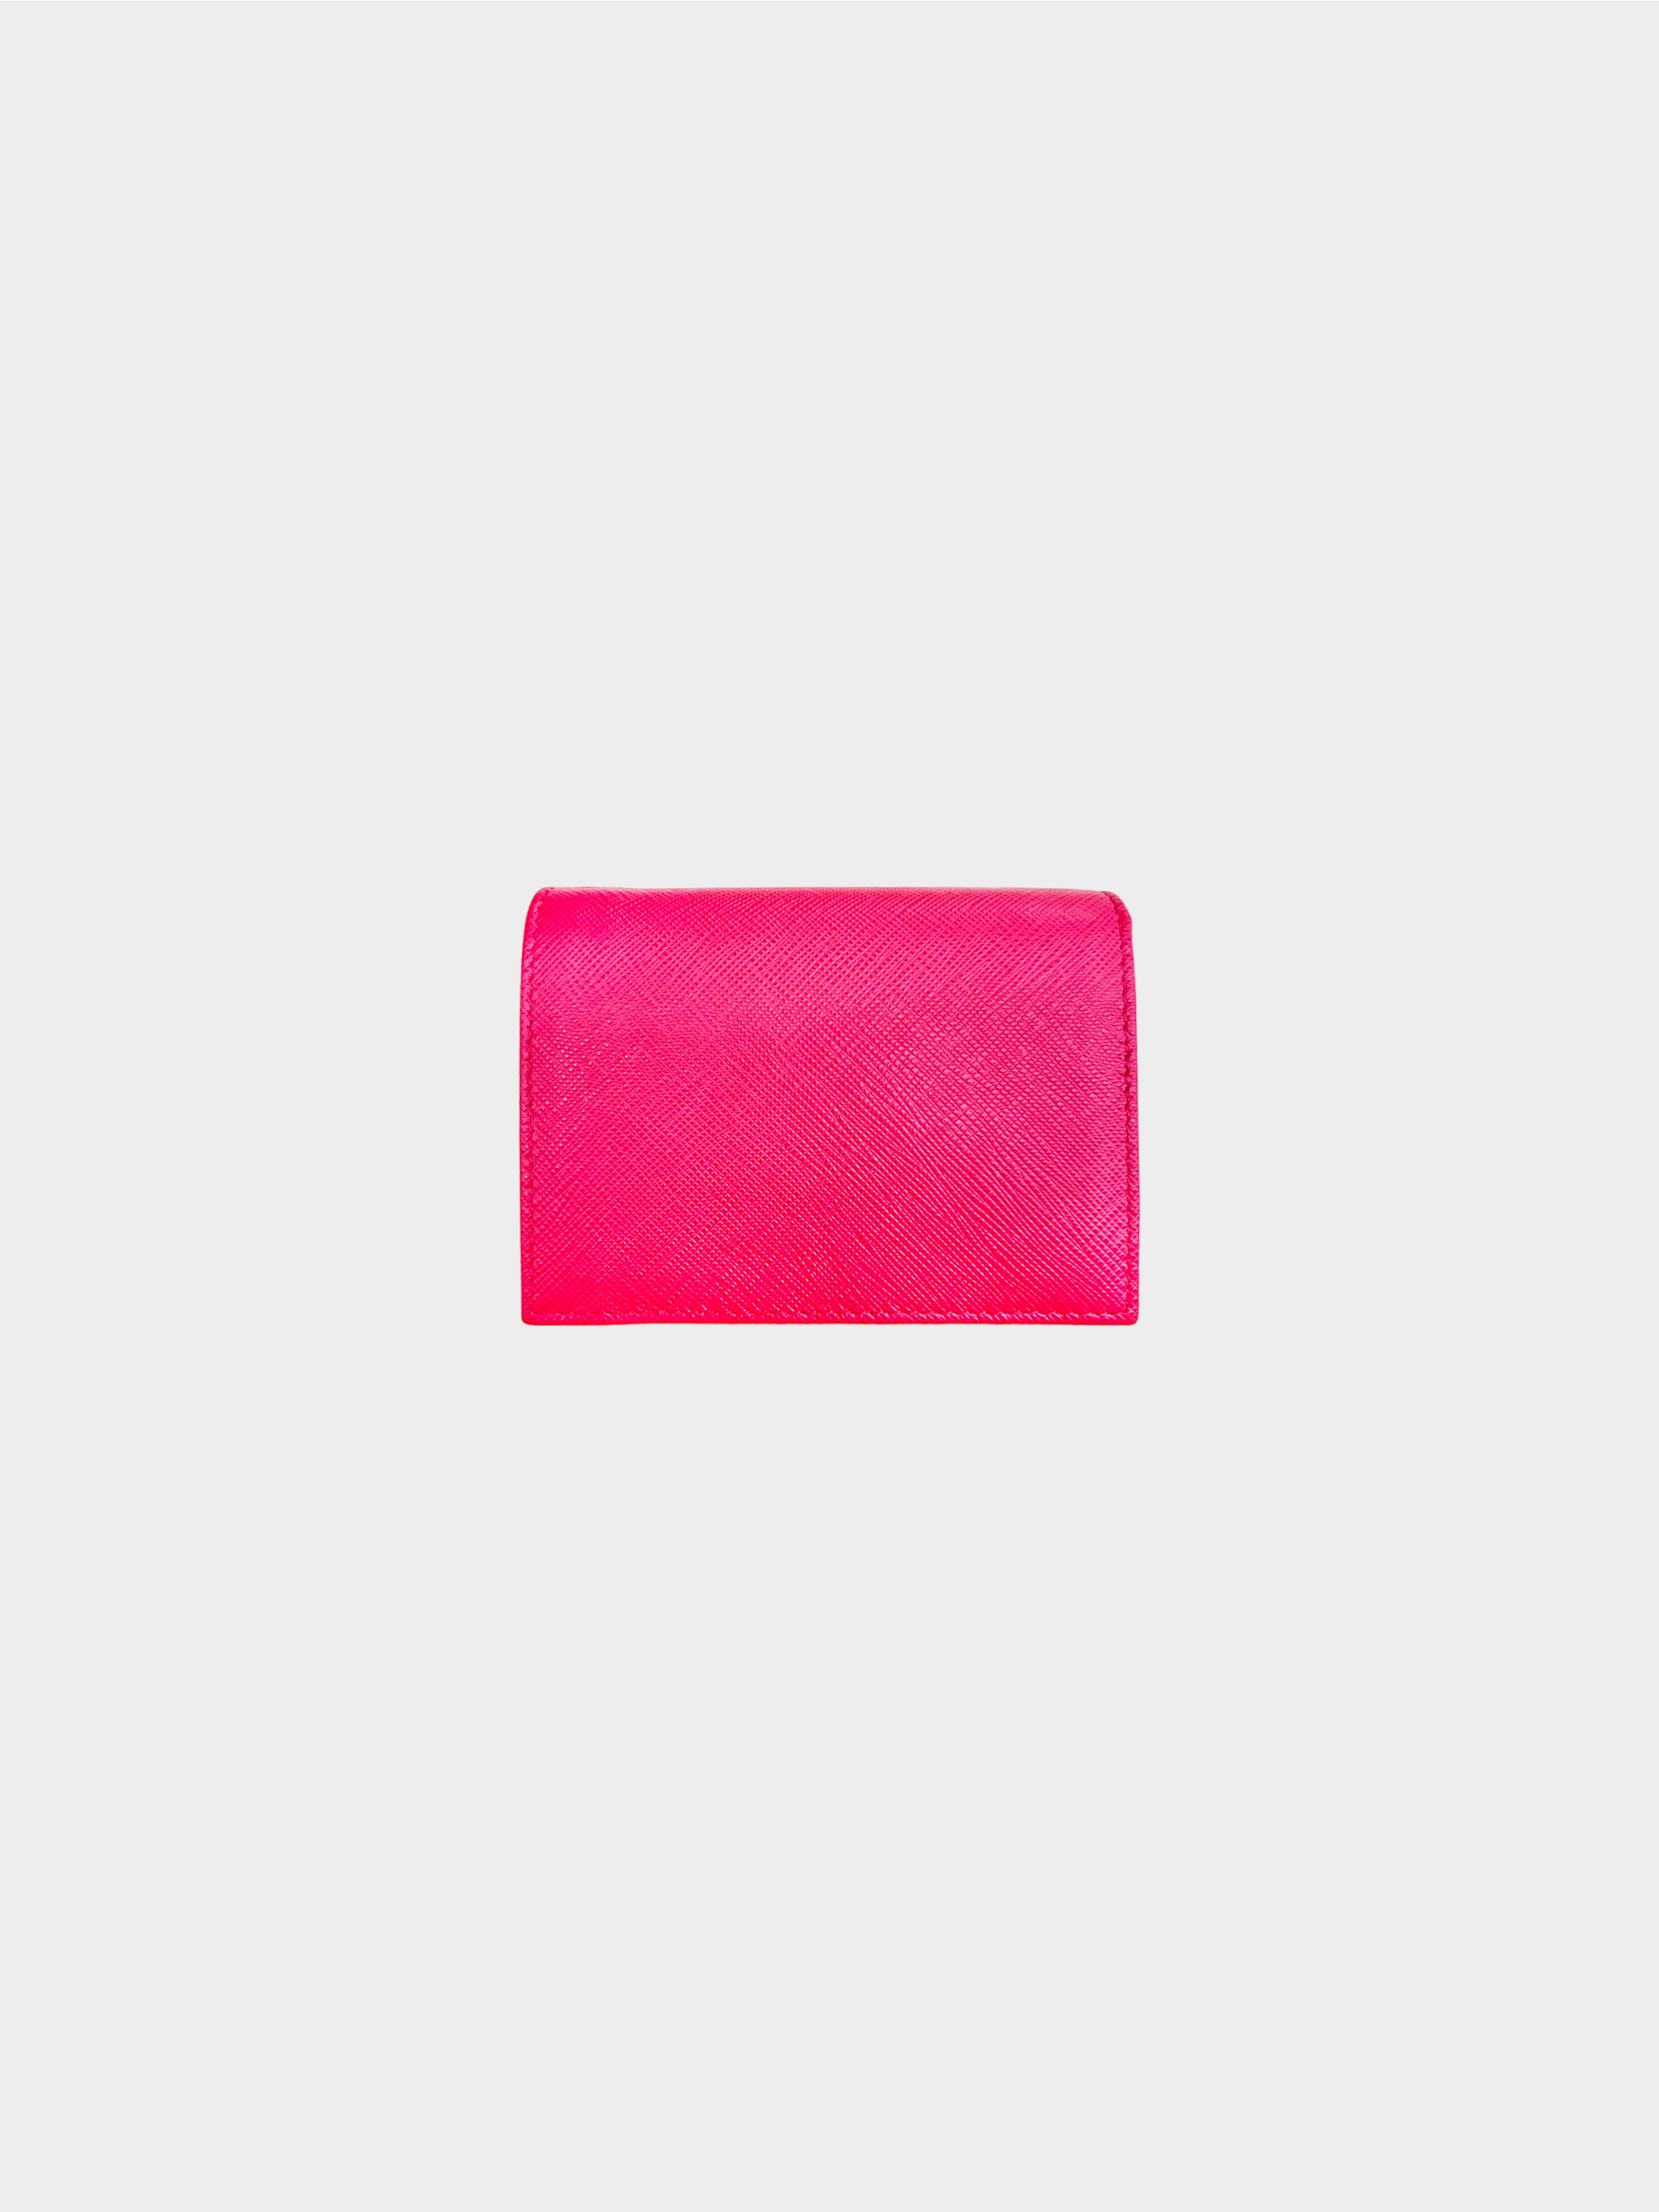 Prada 2010s Pink Small Saffiano Leather Wallet